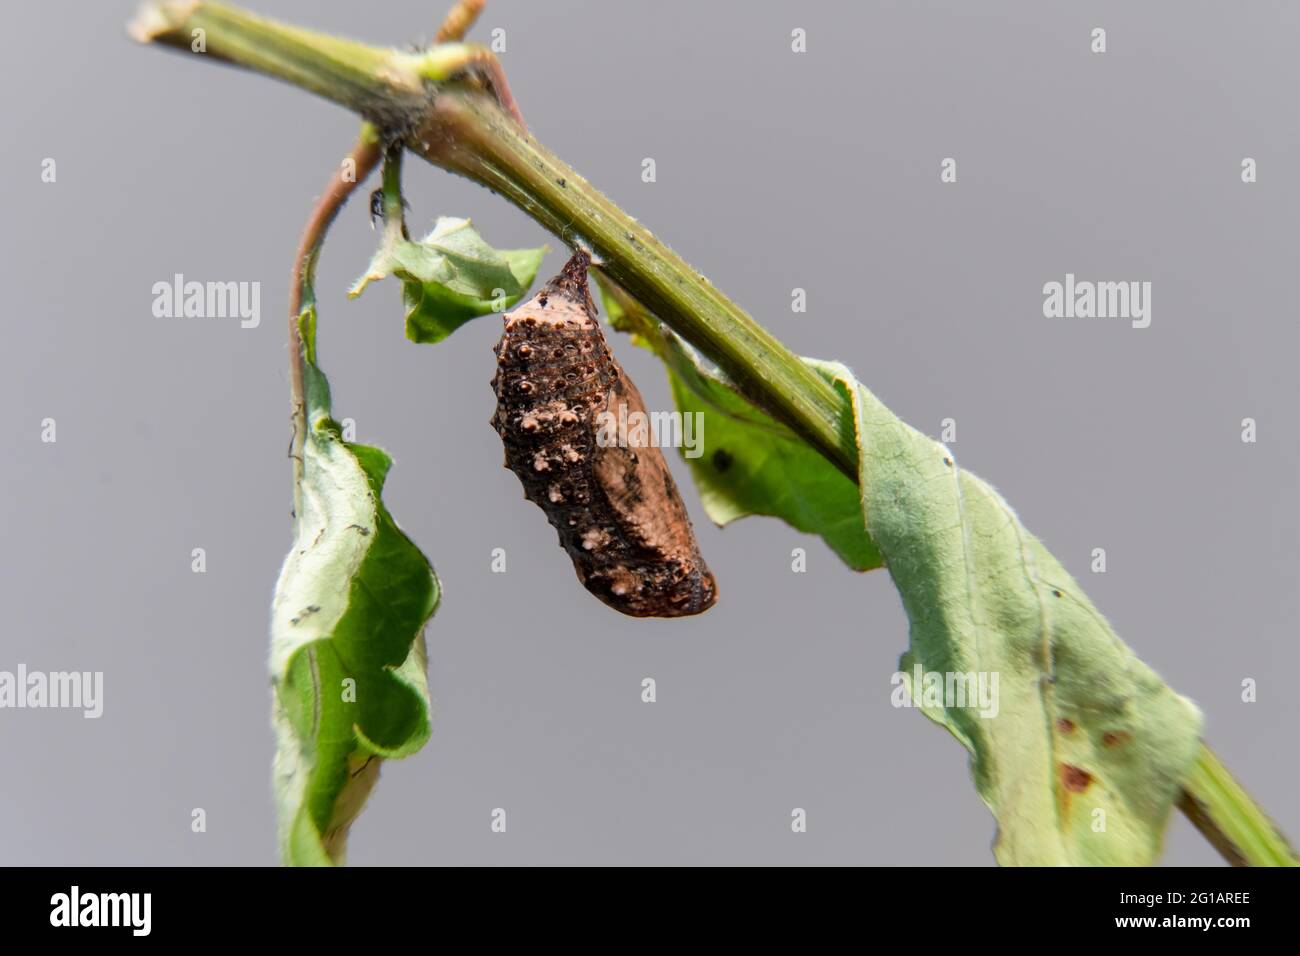 Blue Pansy butterfly chrysalis or pupa hanging on branch Stock Photo